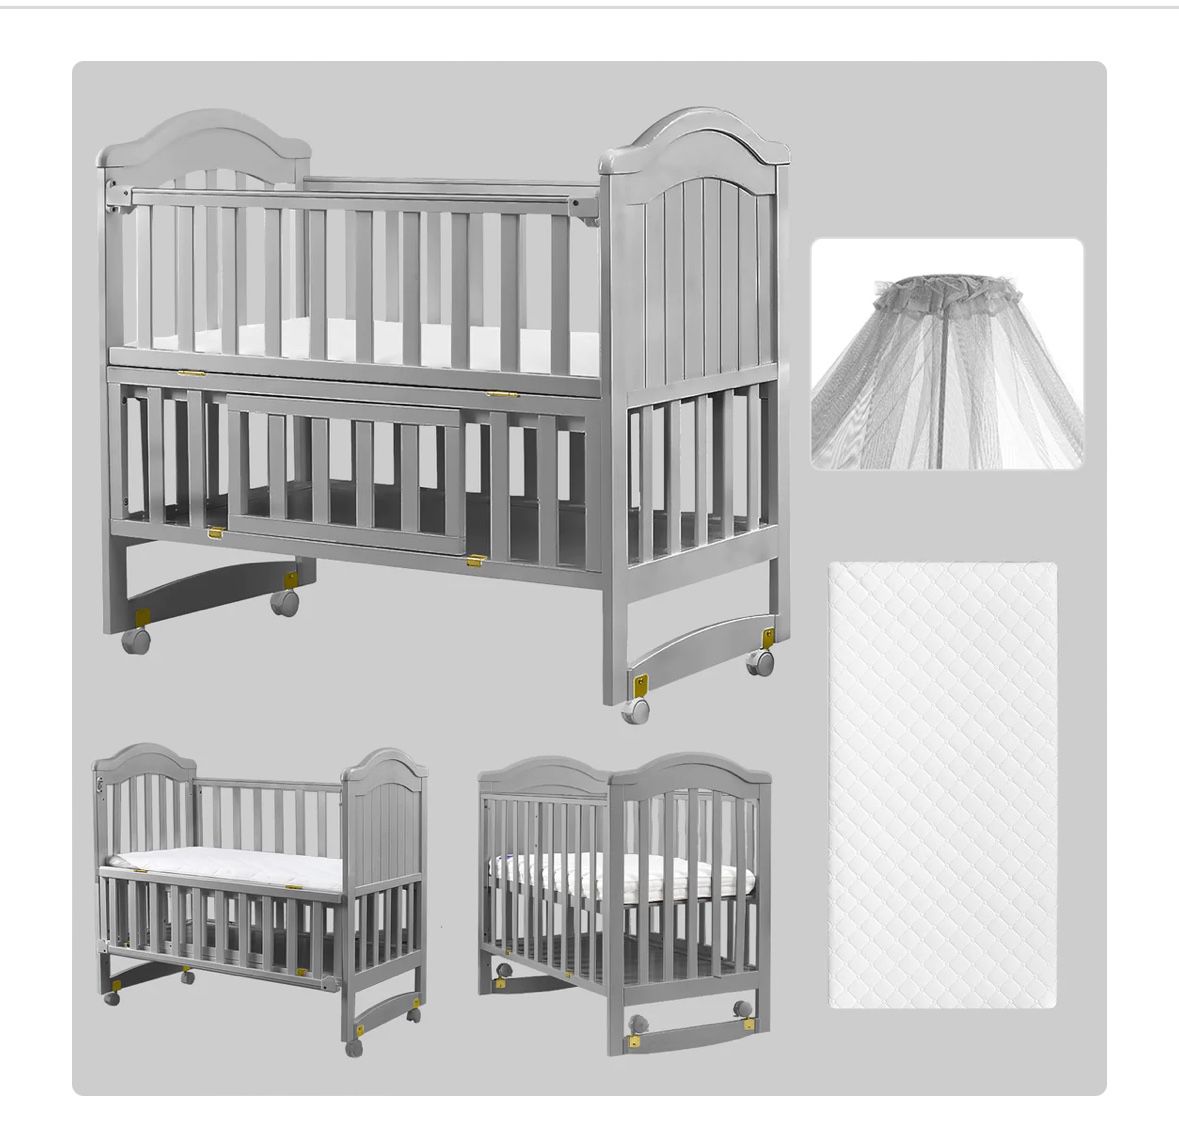 New & Only $180…HARPPA Portable Mini Crib 6-in-1 Convertible (Mattress + Mosquito Net Included)